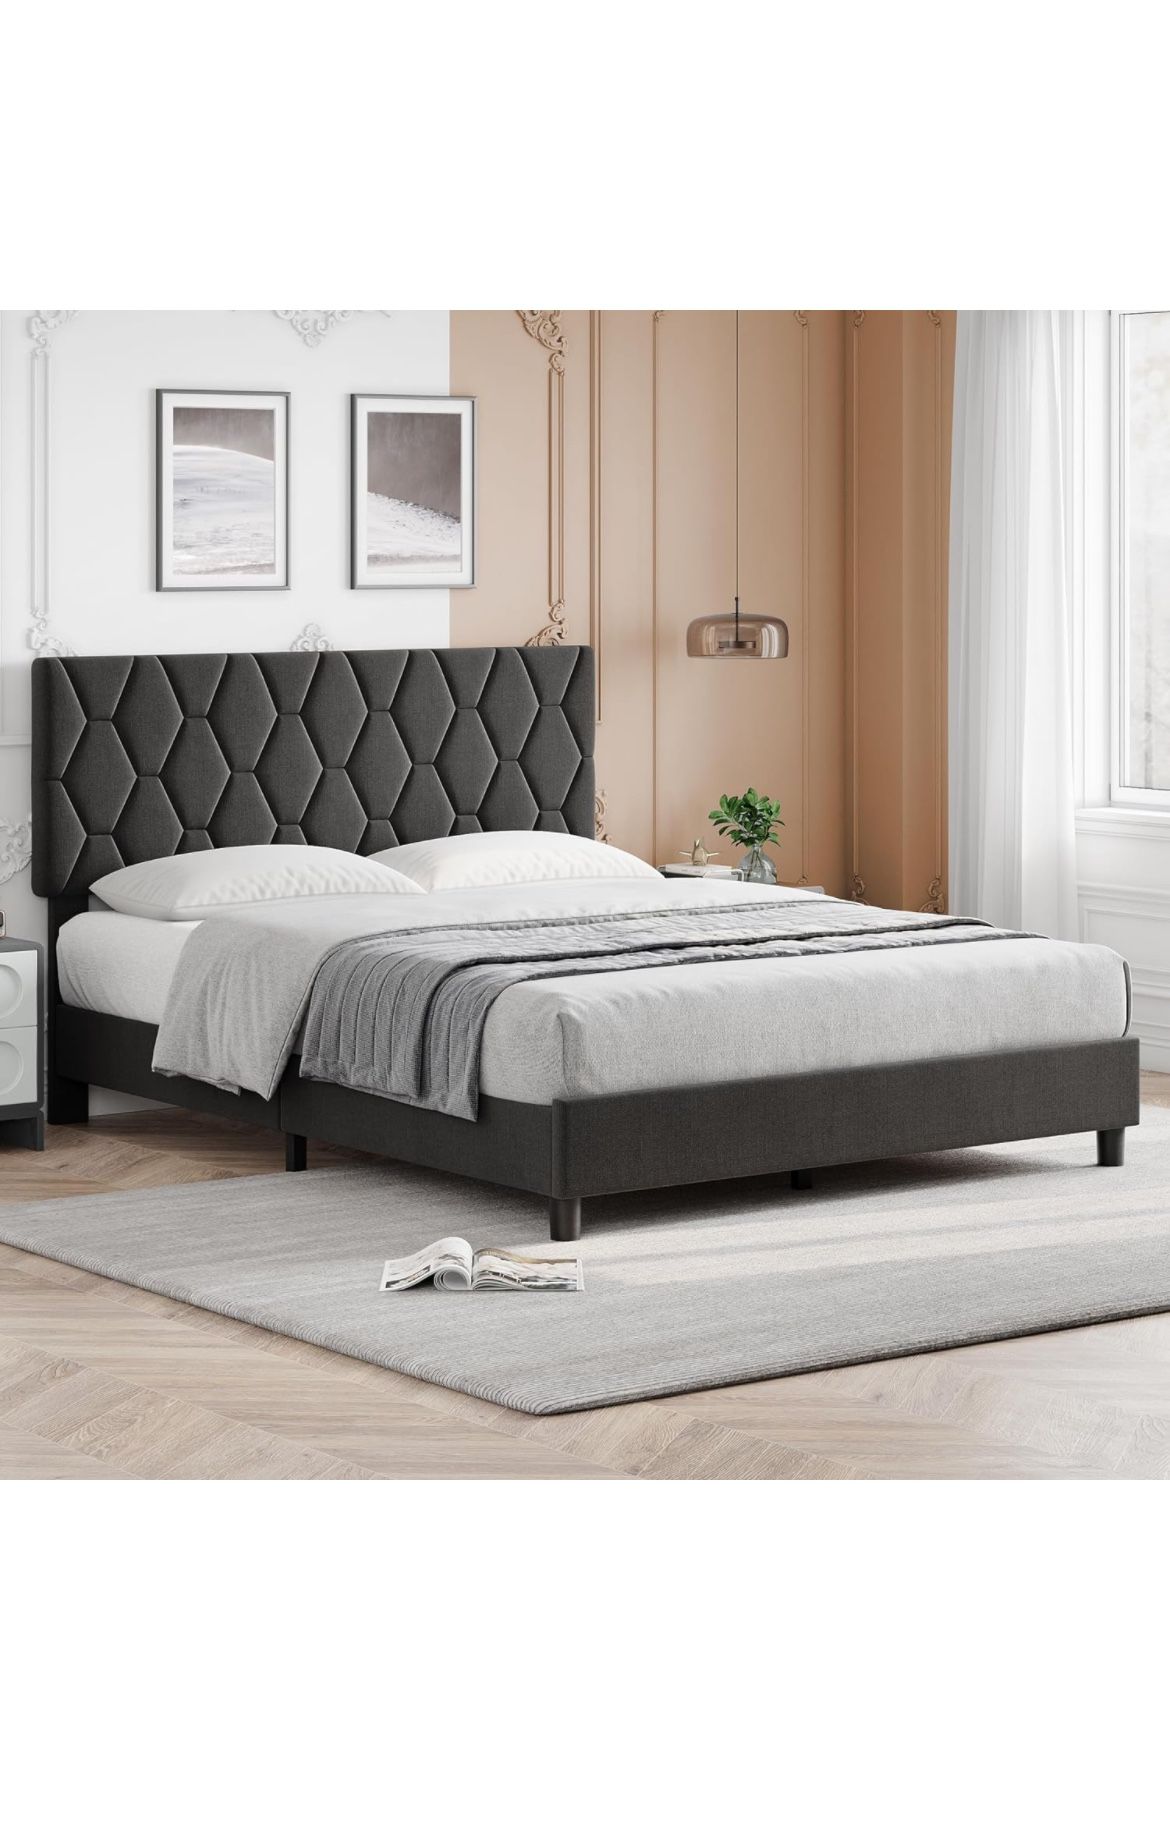 Queen Size Platform Bed Frame with Upholstered Headboard - New In Box